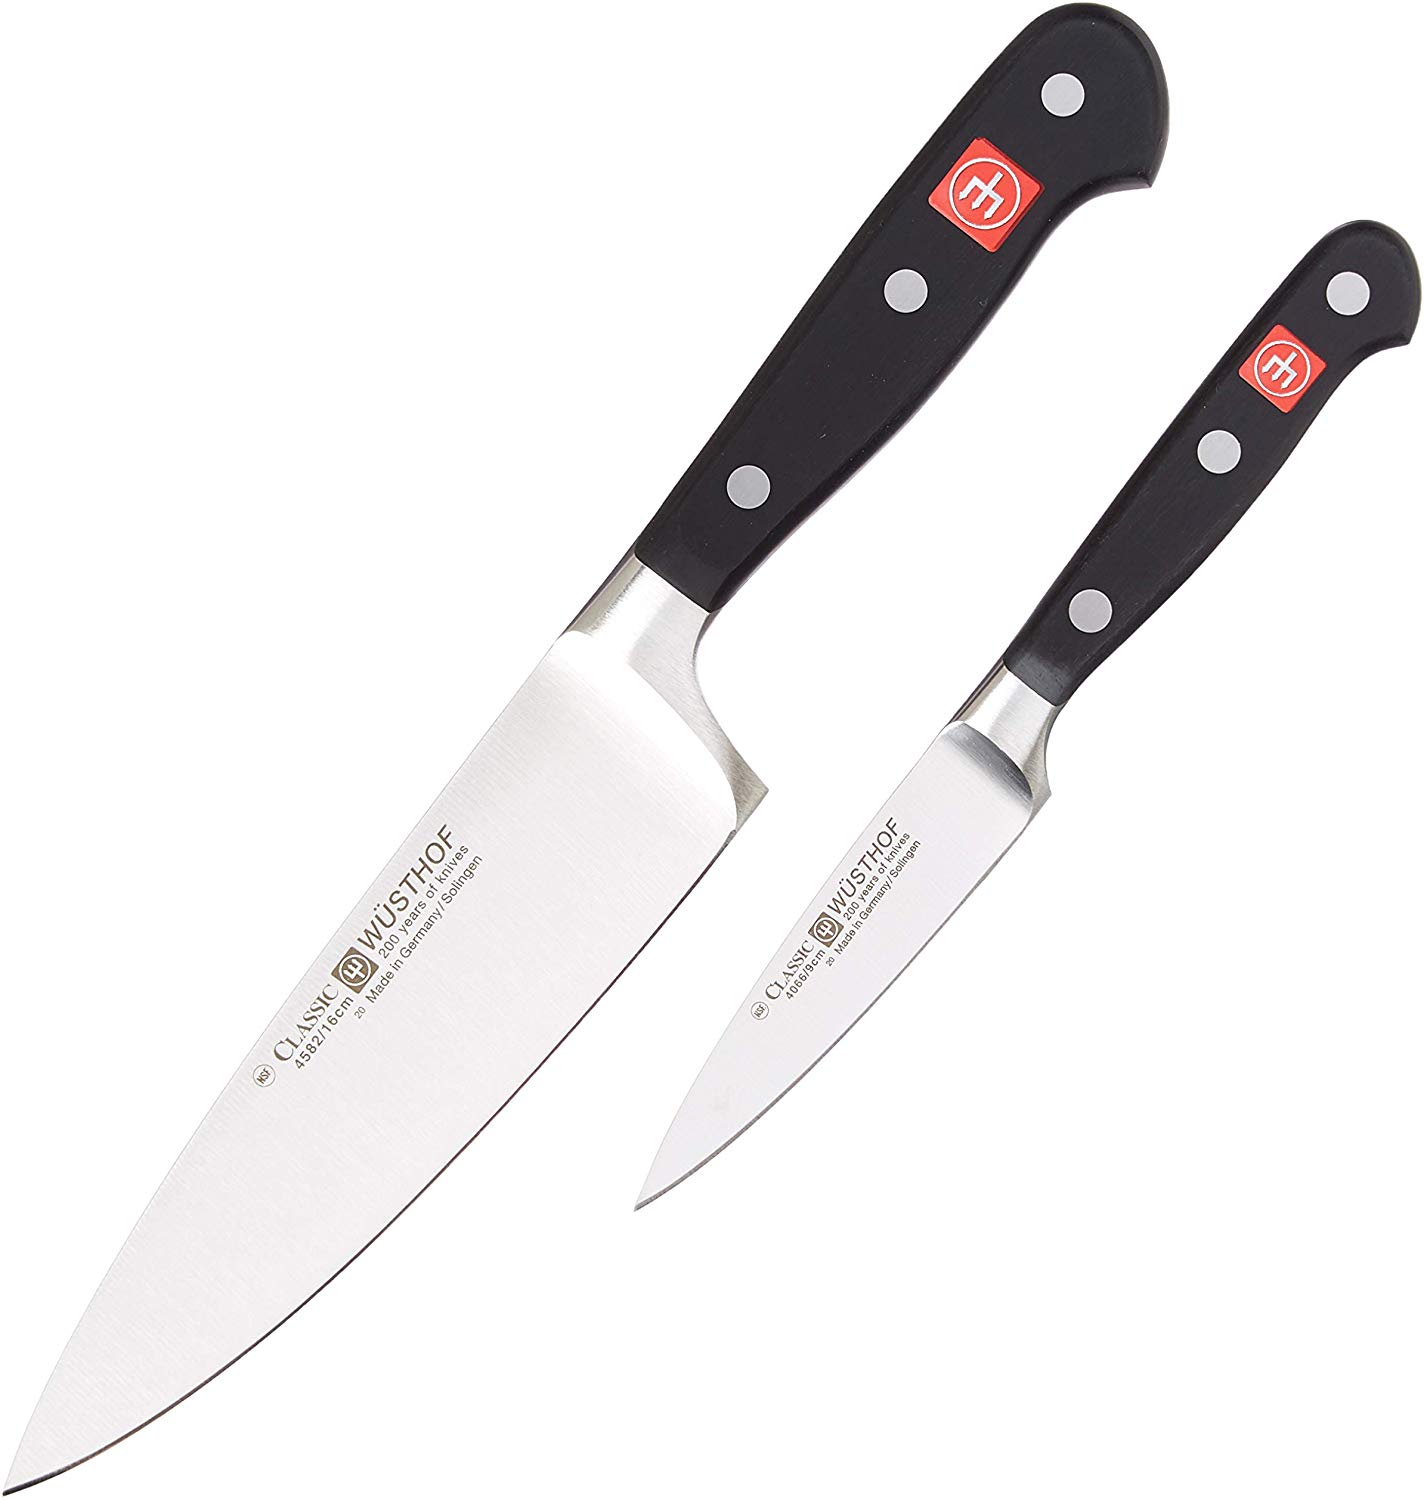 Best Chef Knife Under 100 [2020 ] Top Chef Knives Under 100 Dollars